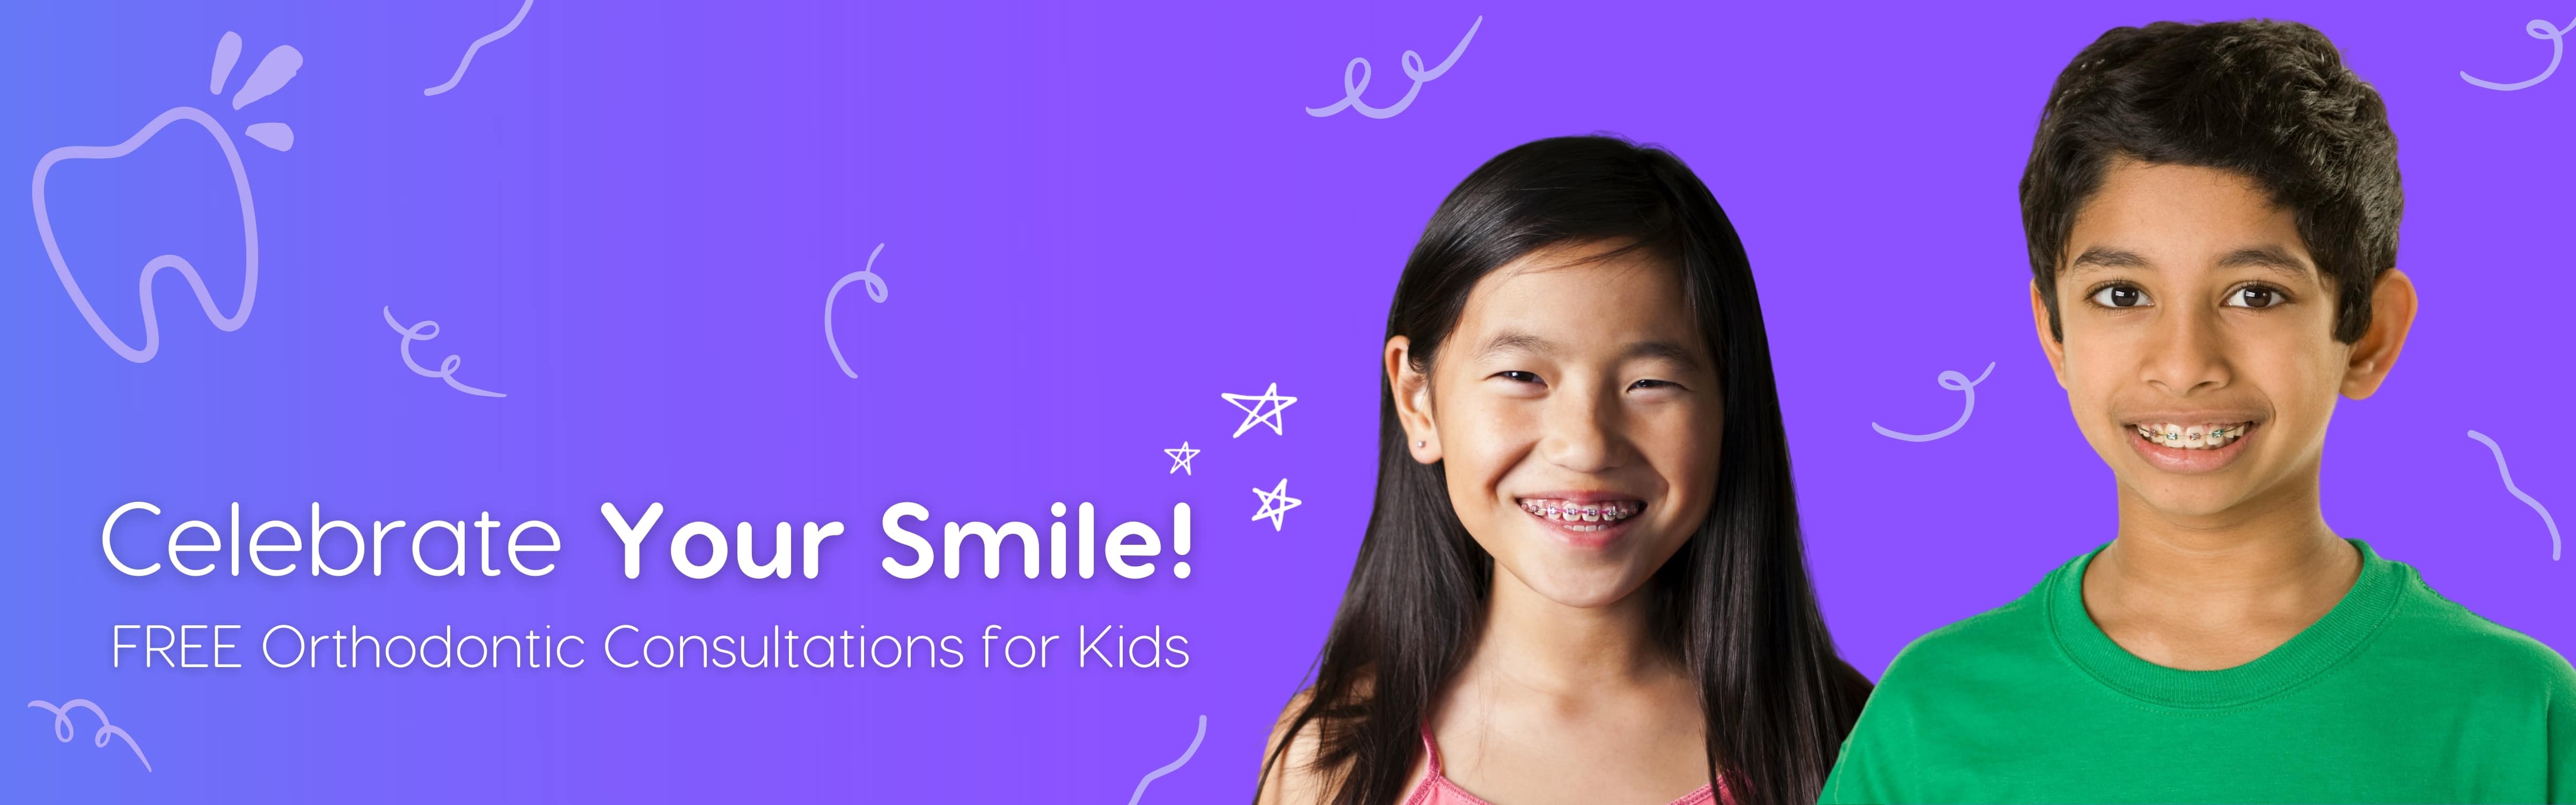 kids smiling with braces on purple background celebrate your smile